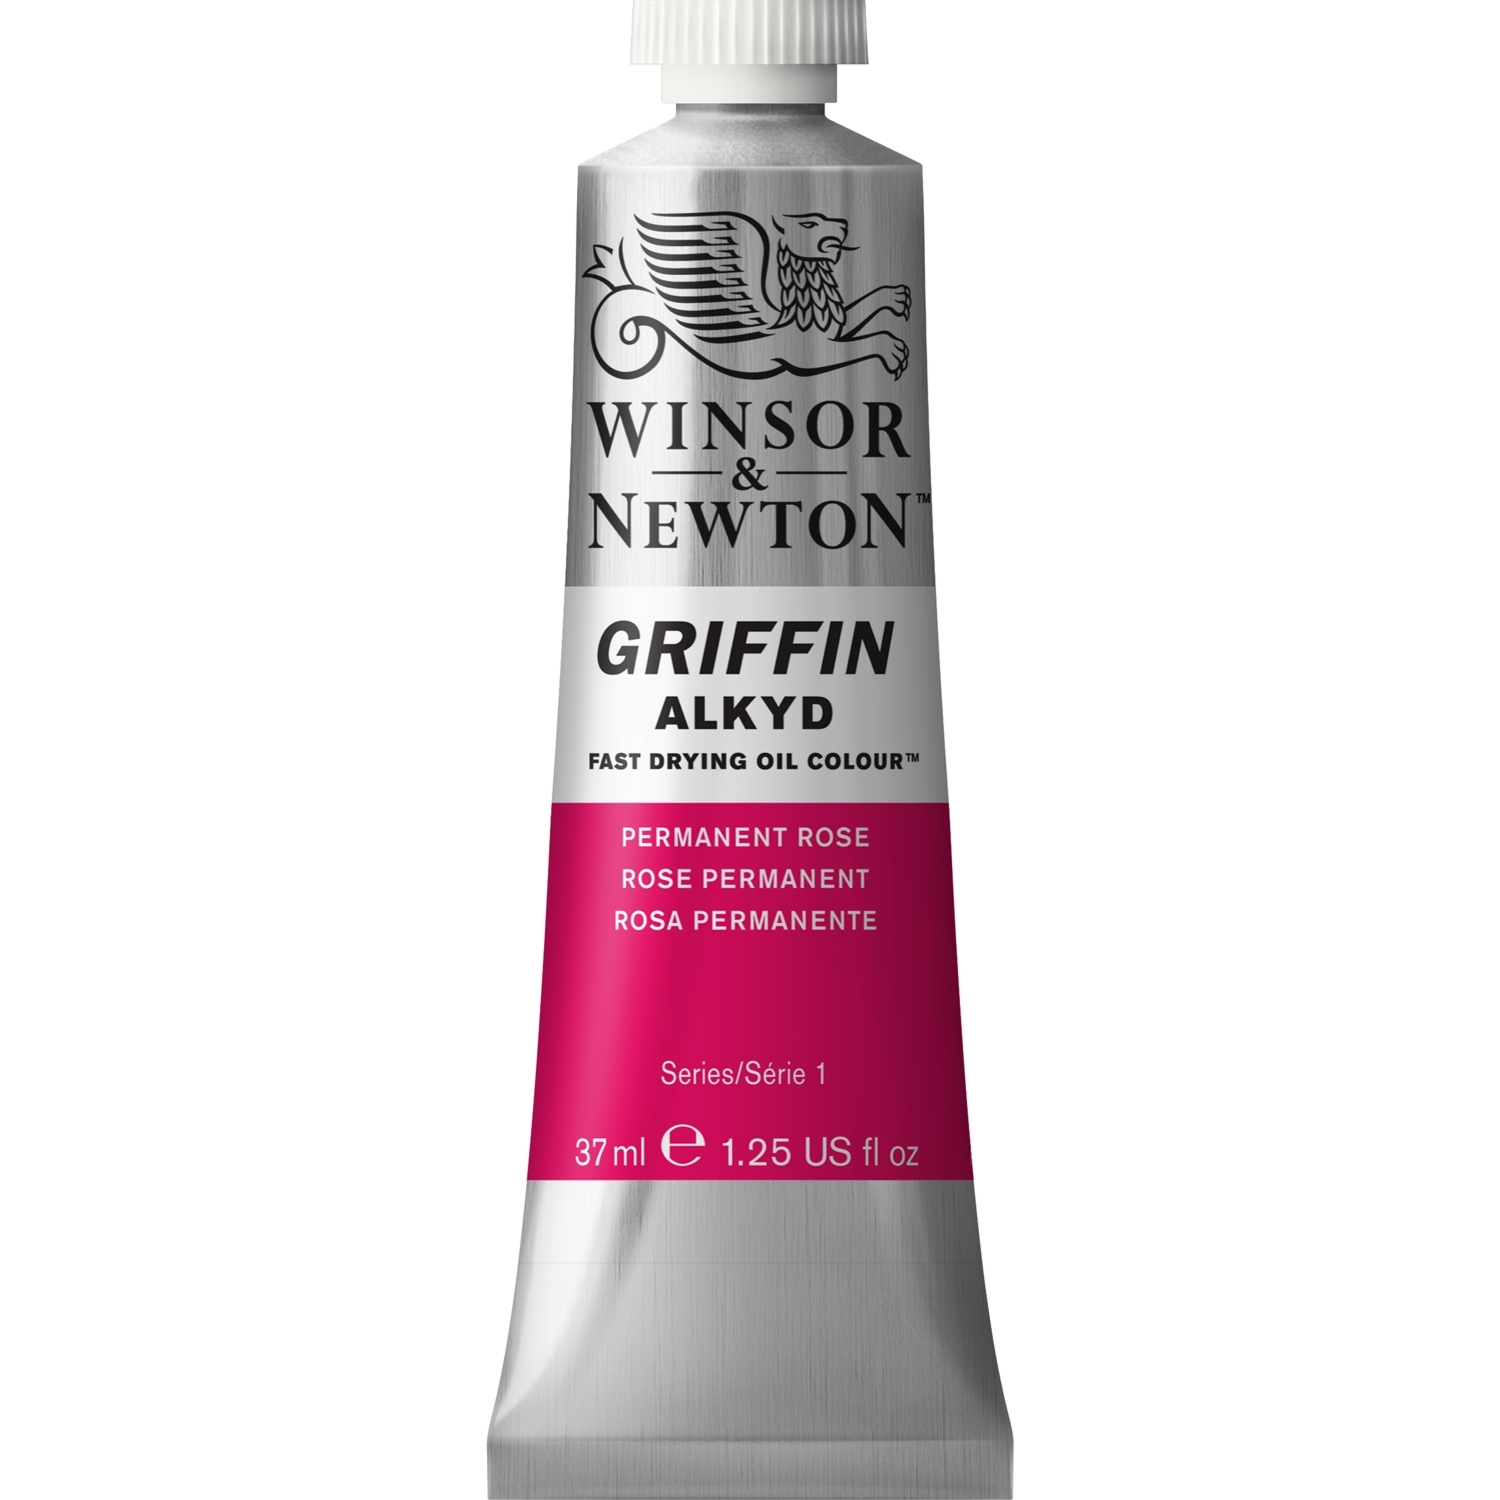 Winsor and Newton Griffin Alkyd Oil Colour - Permanent Rose Image 1